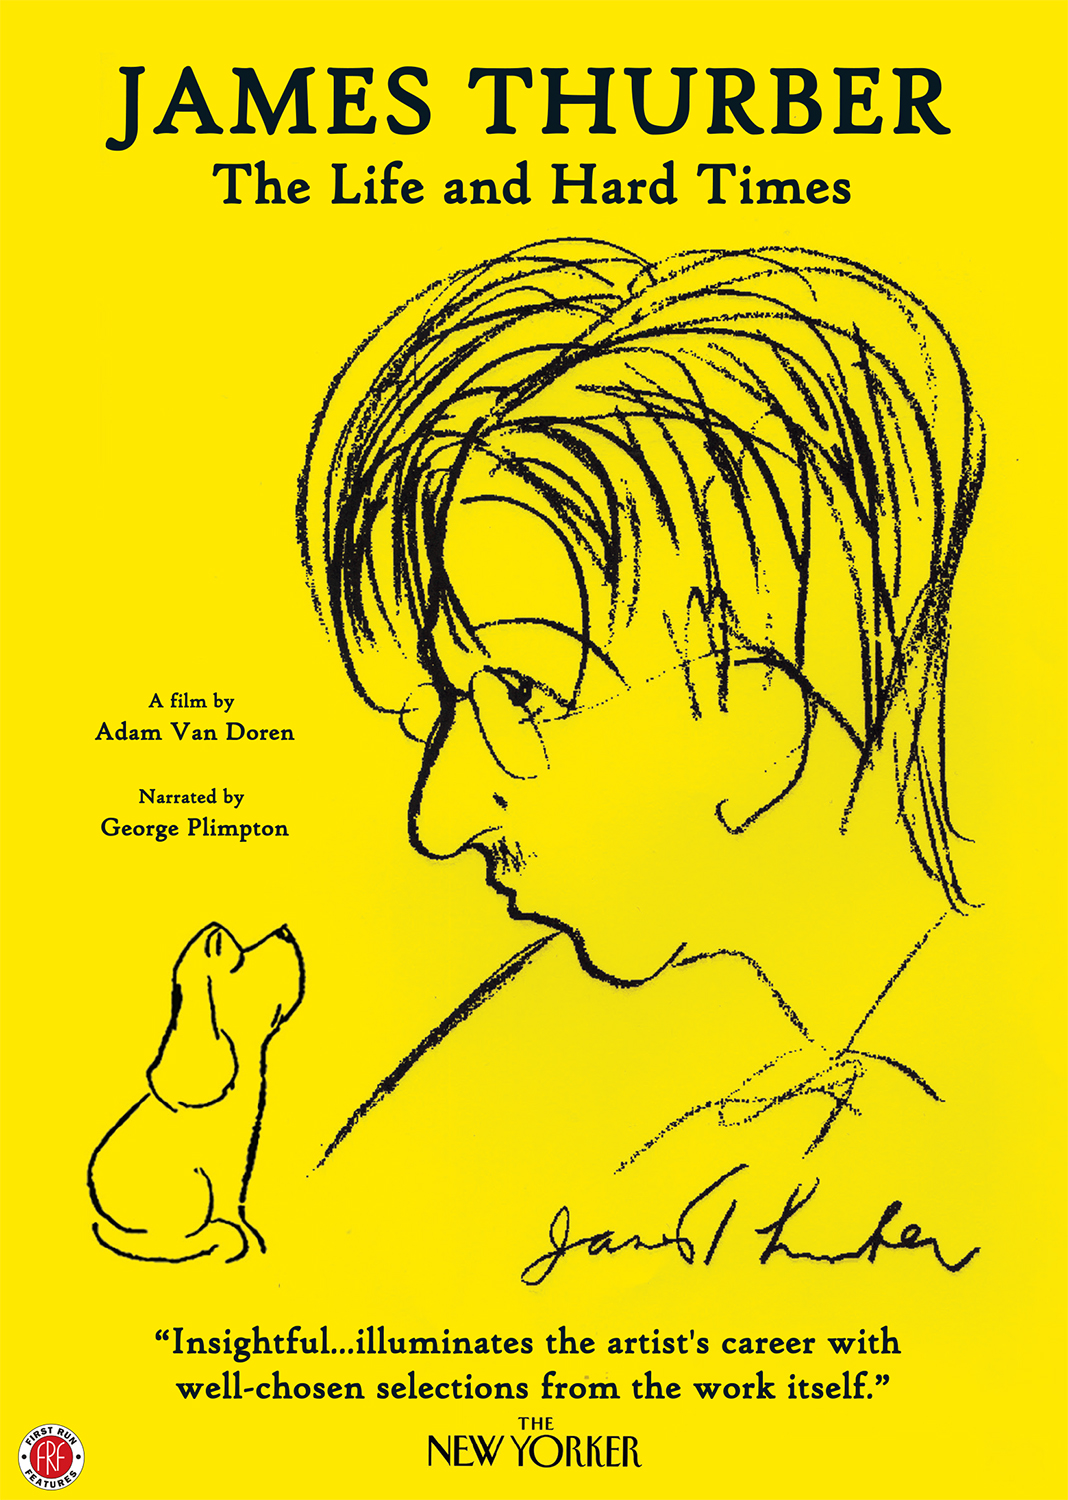 James Thurber in James Thurber: The Life and Hard Times (2000)